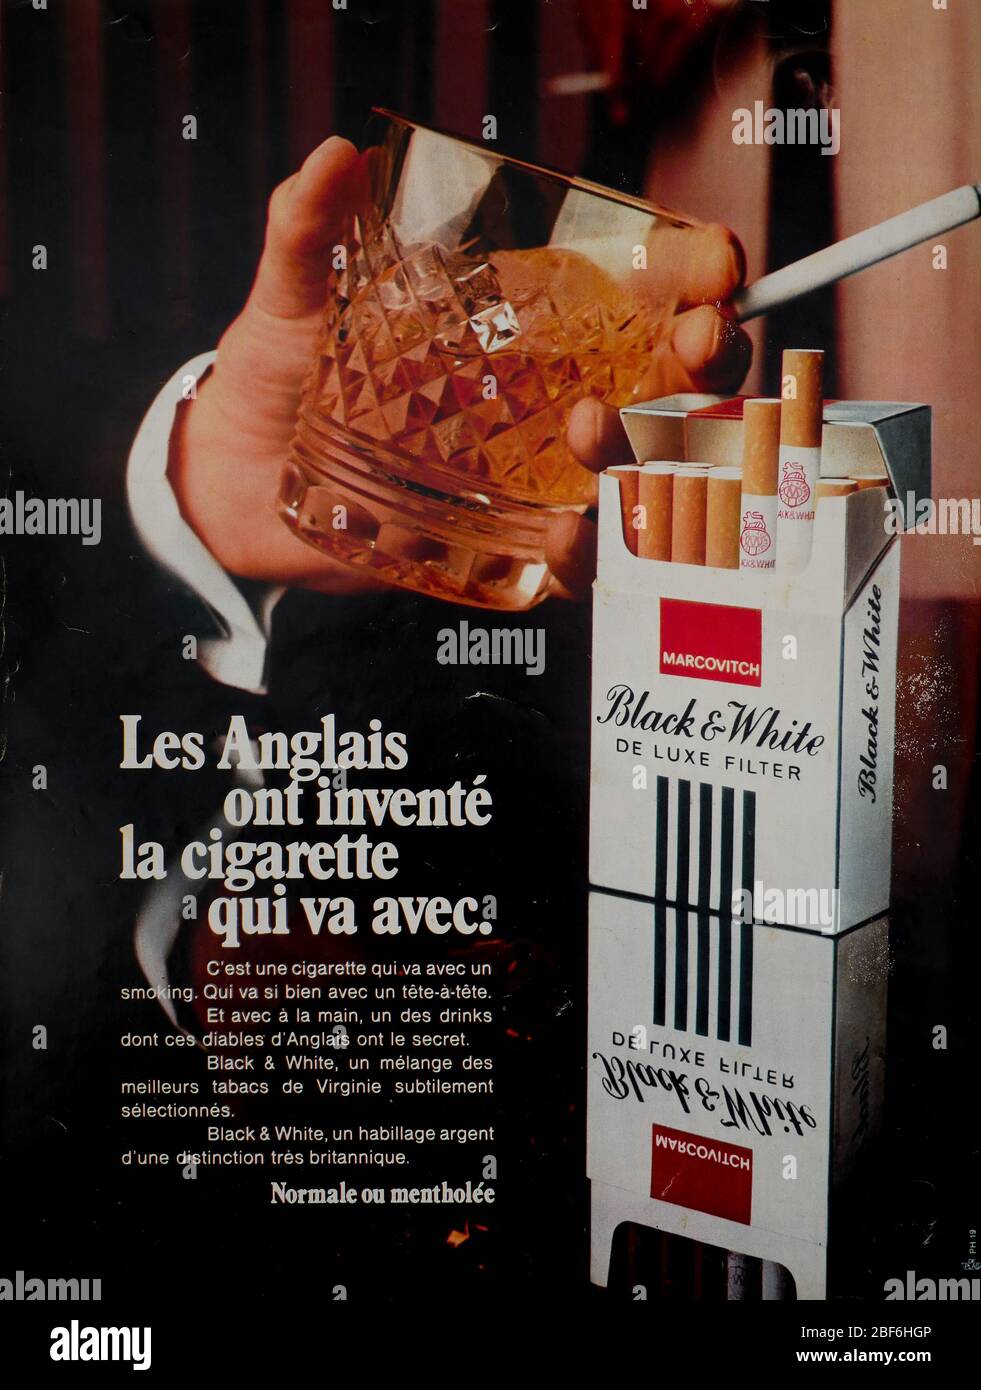 Advertisement page for Black and White cigarettes, published on the back cover of the French news magazine Paris-Match, 1972, France Stock Photo